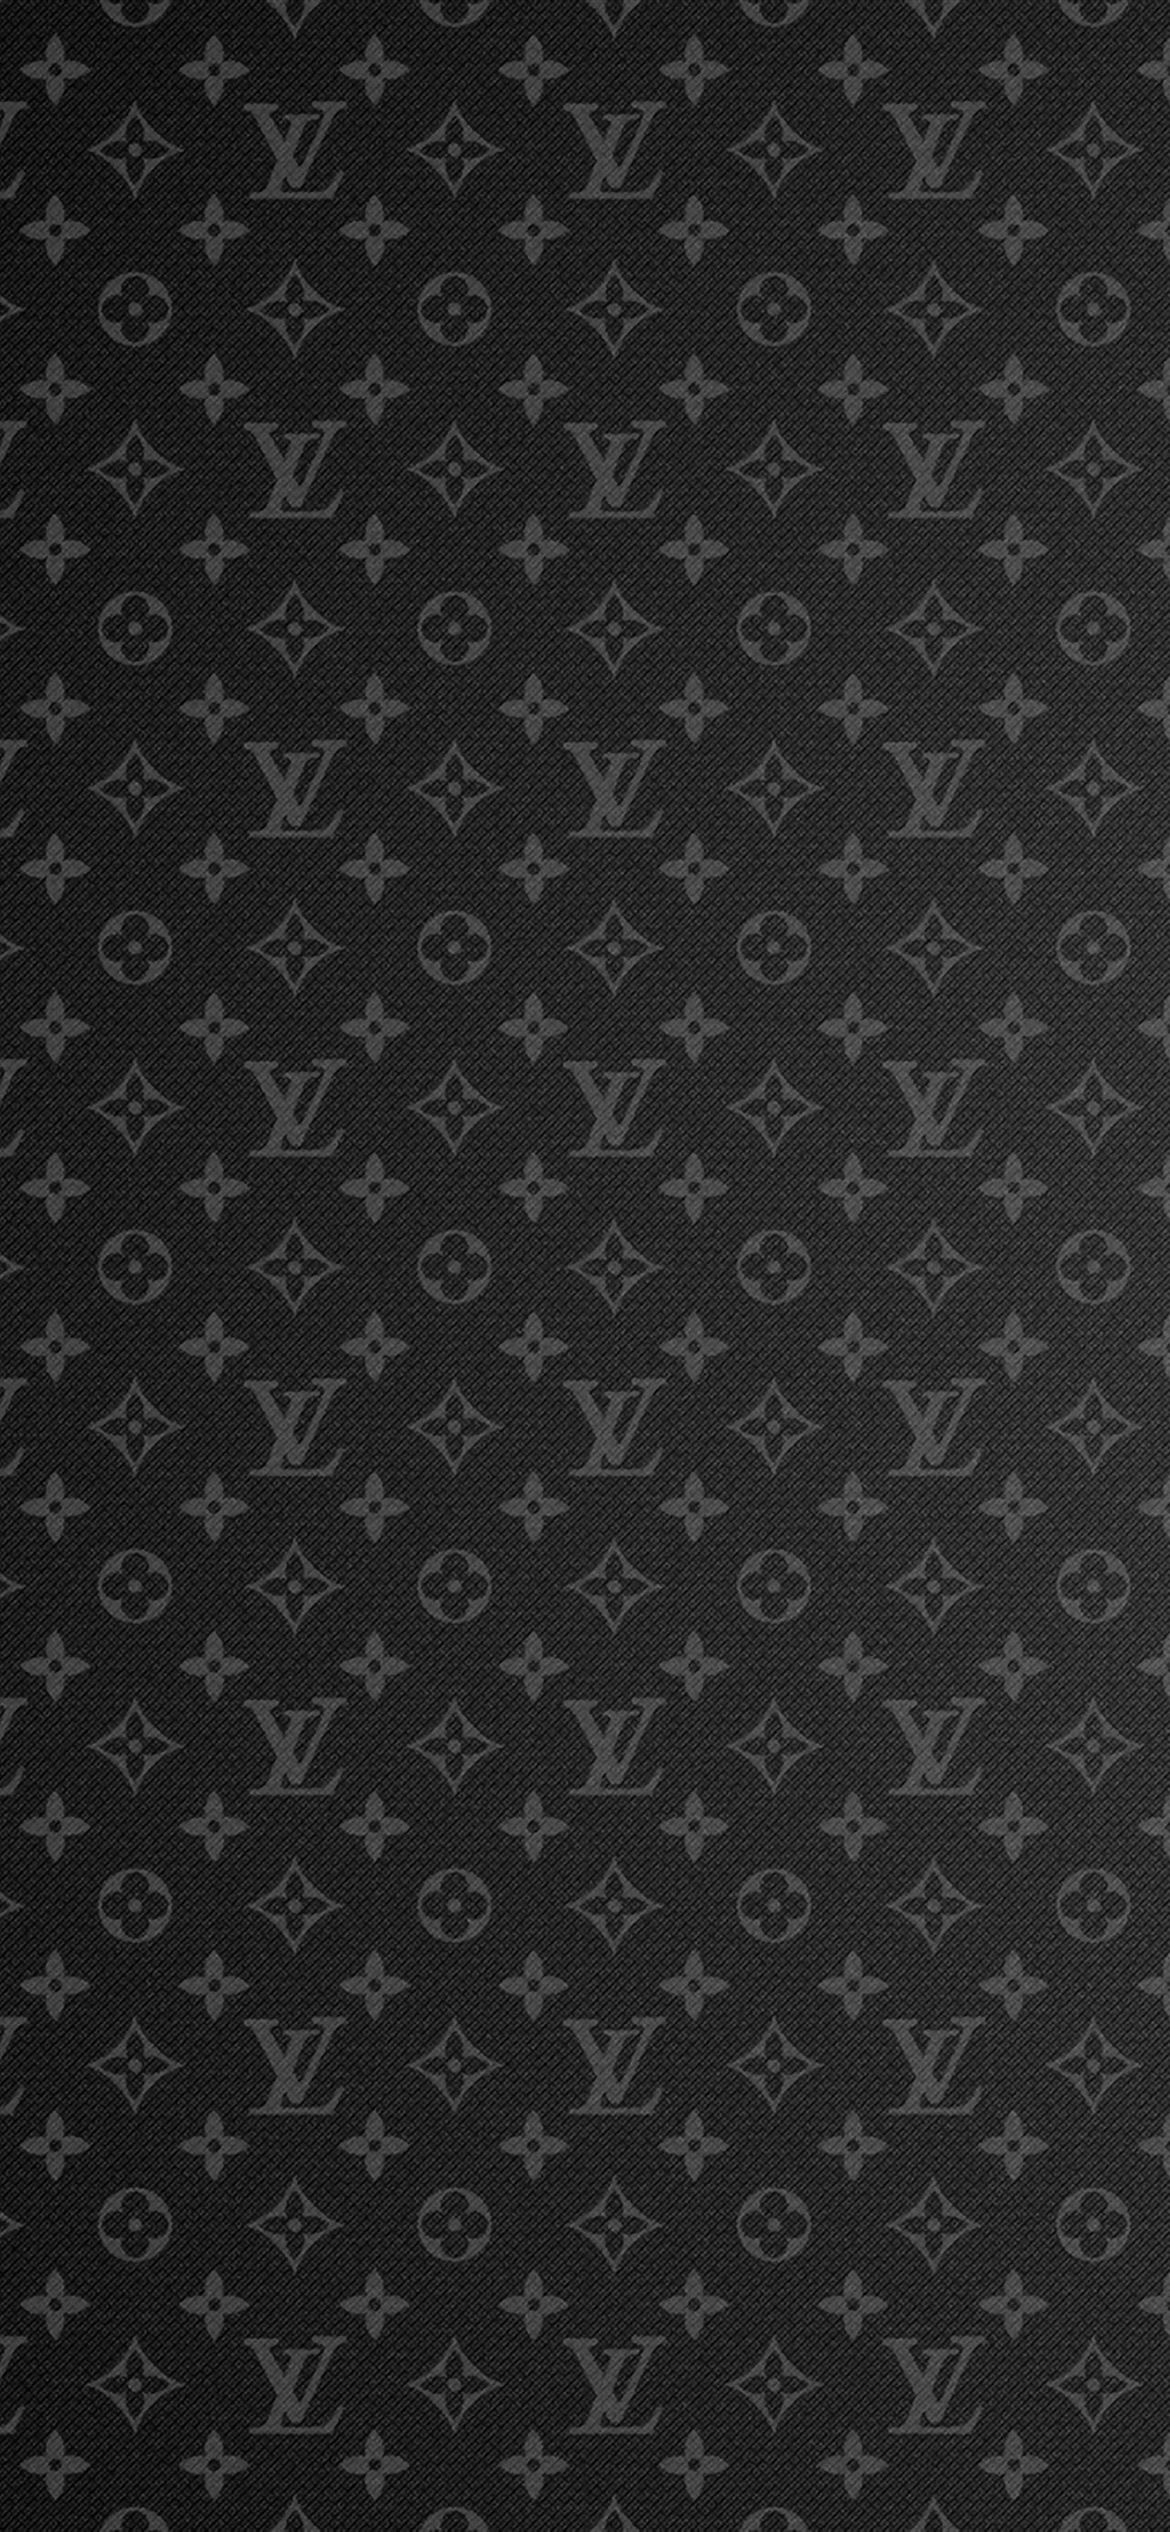 Lv Iphone Wallpapers